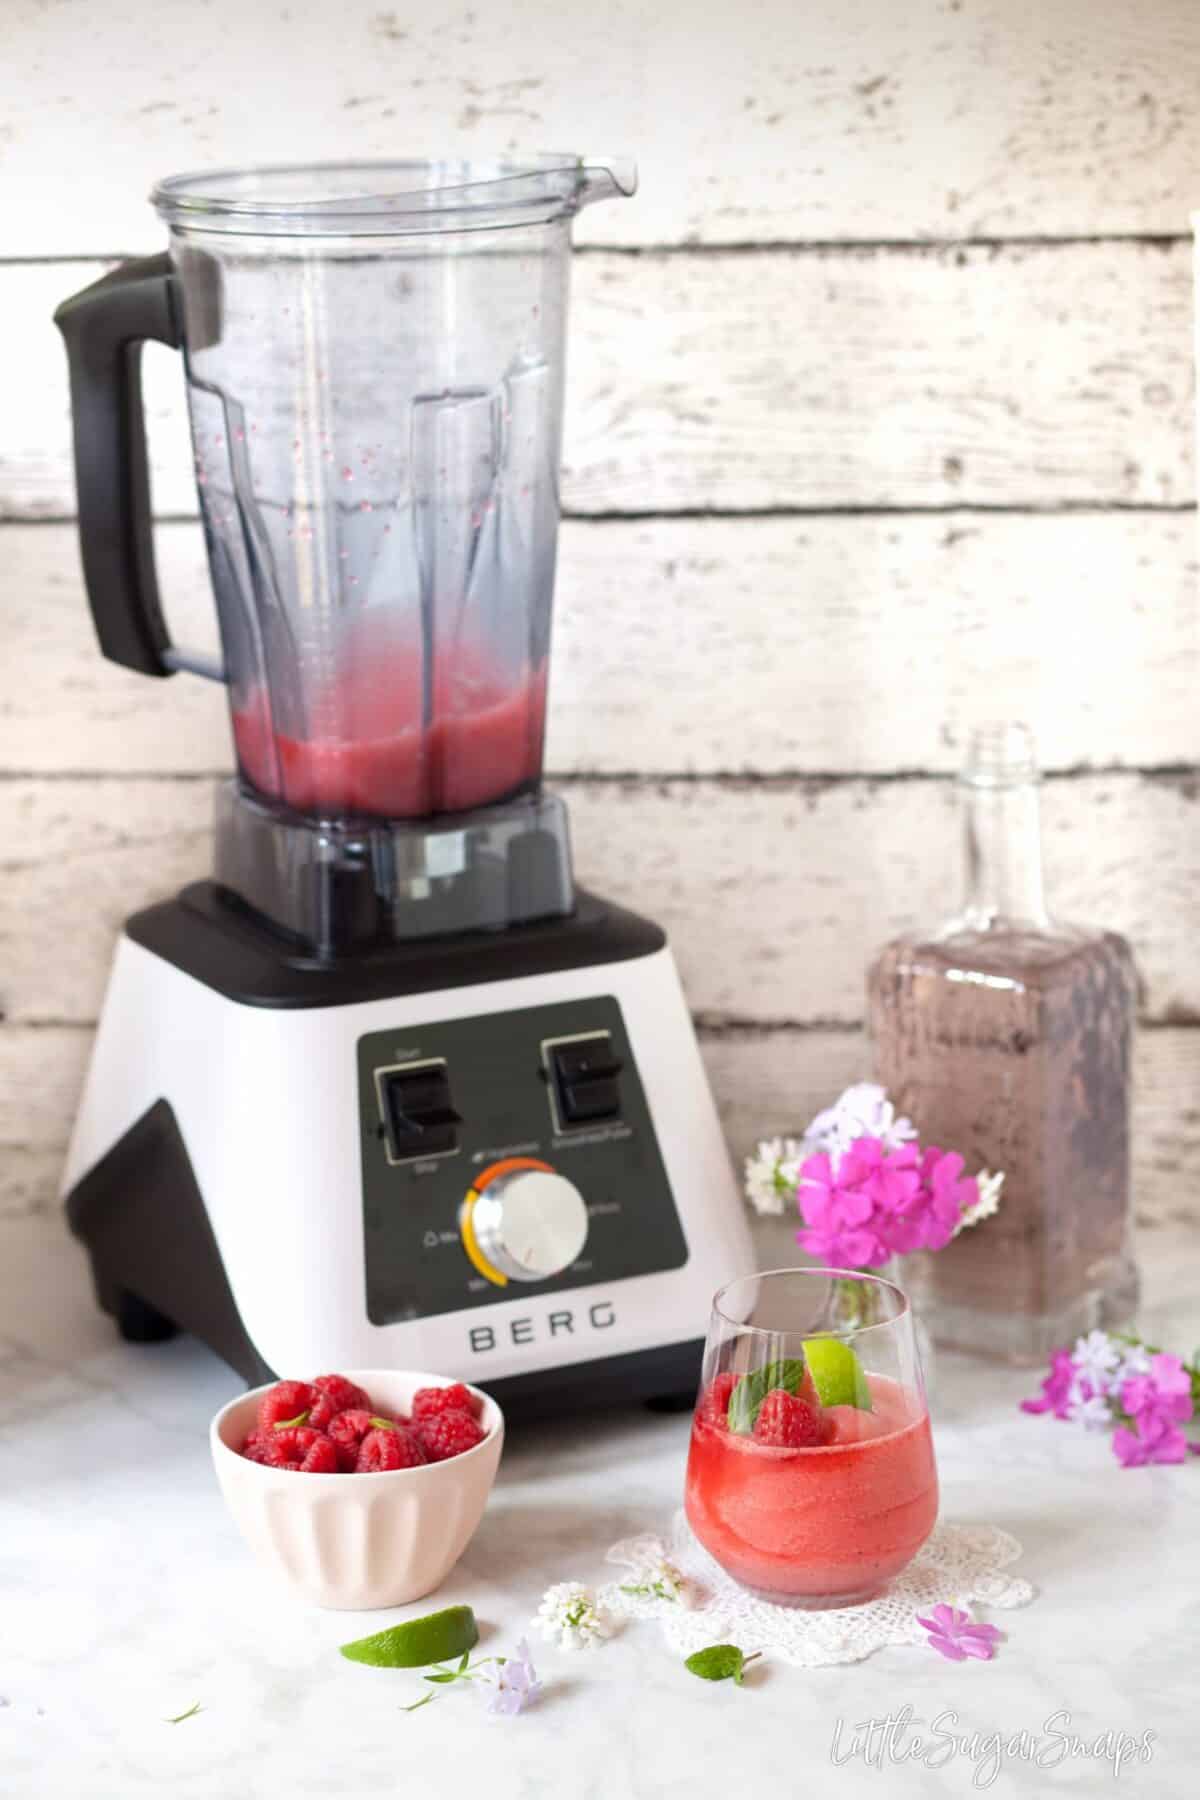 A slushie style drink gin & tonic and a Berg Innovations blender